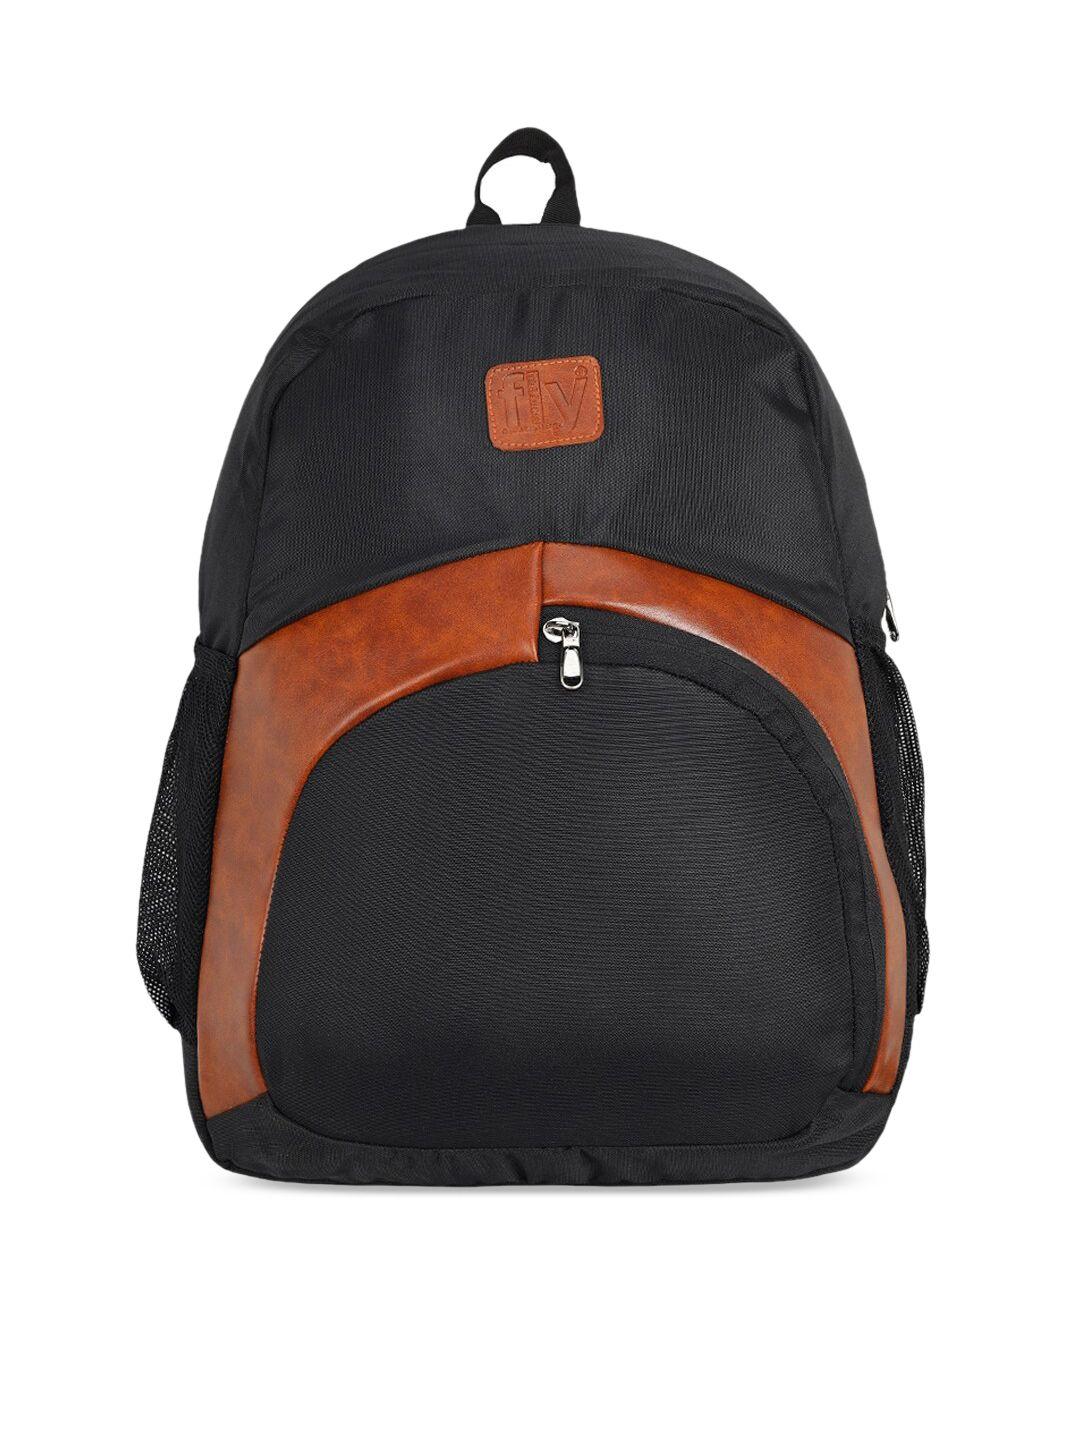 fly fashion unisex black & brown colourblocked backpack